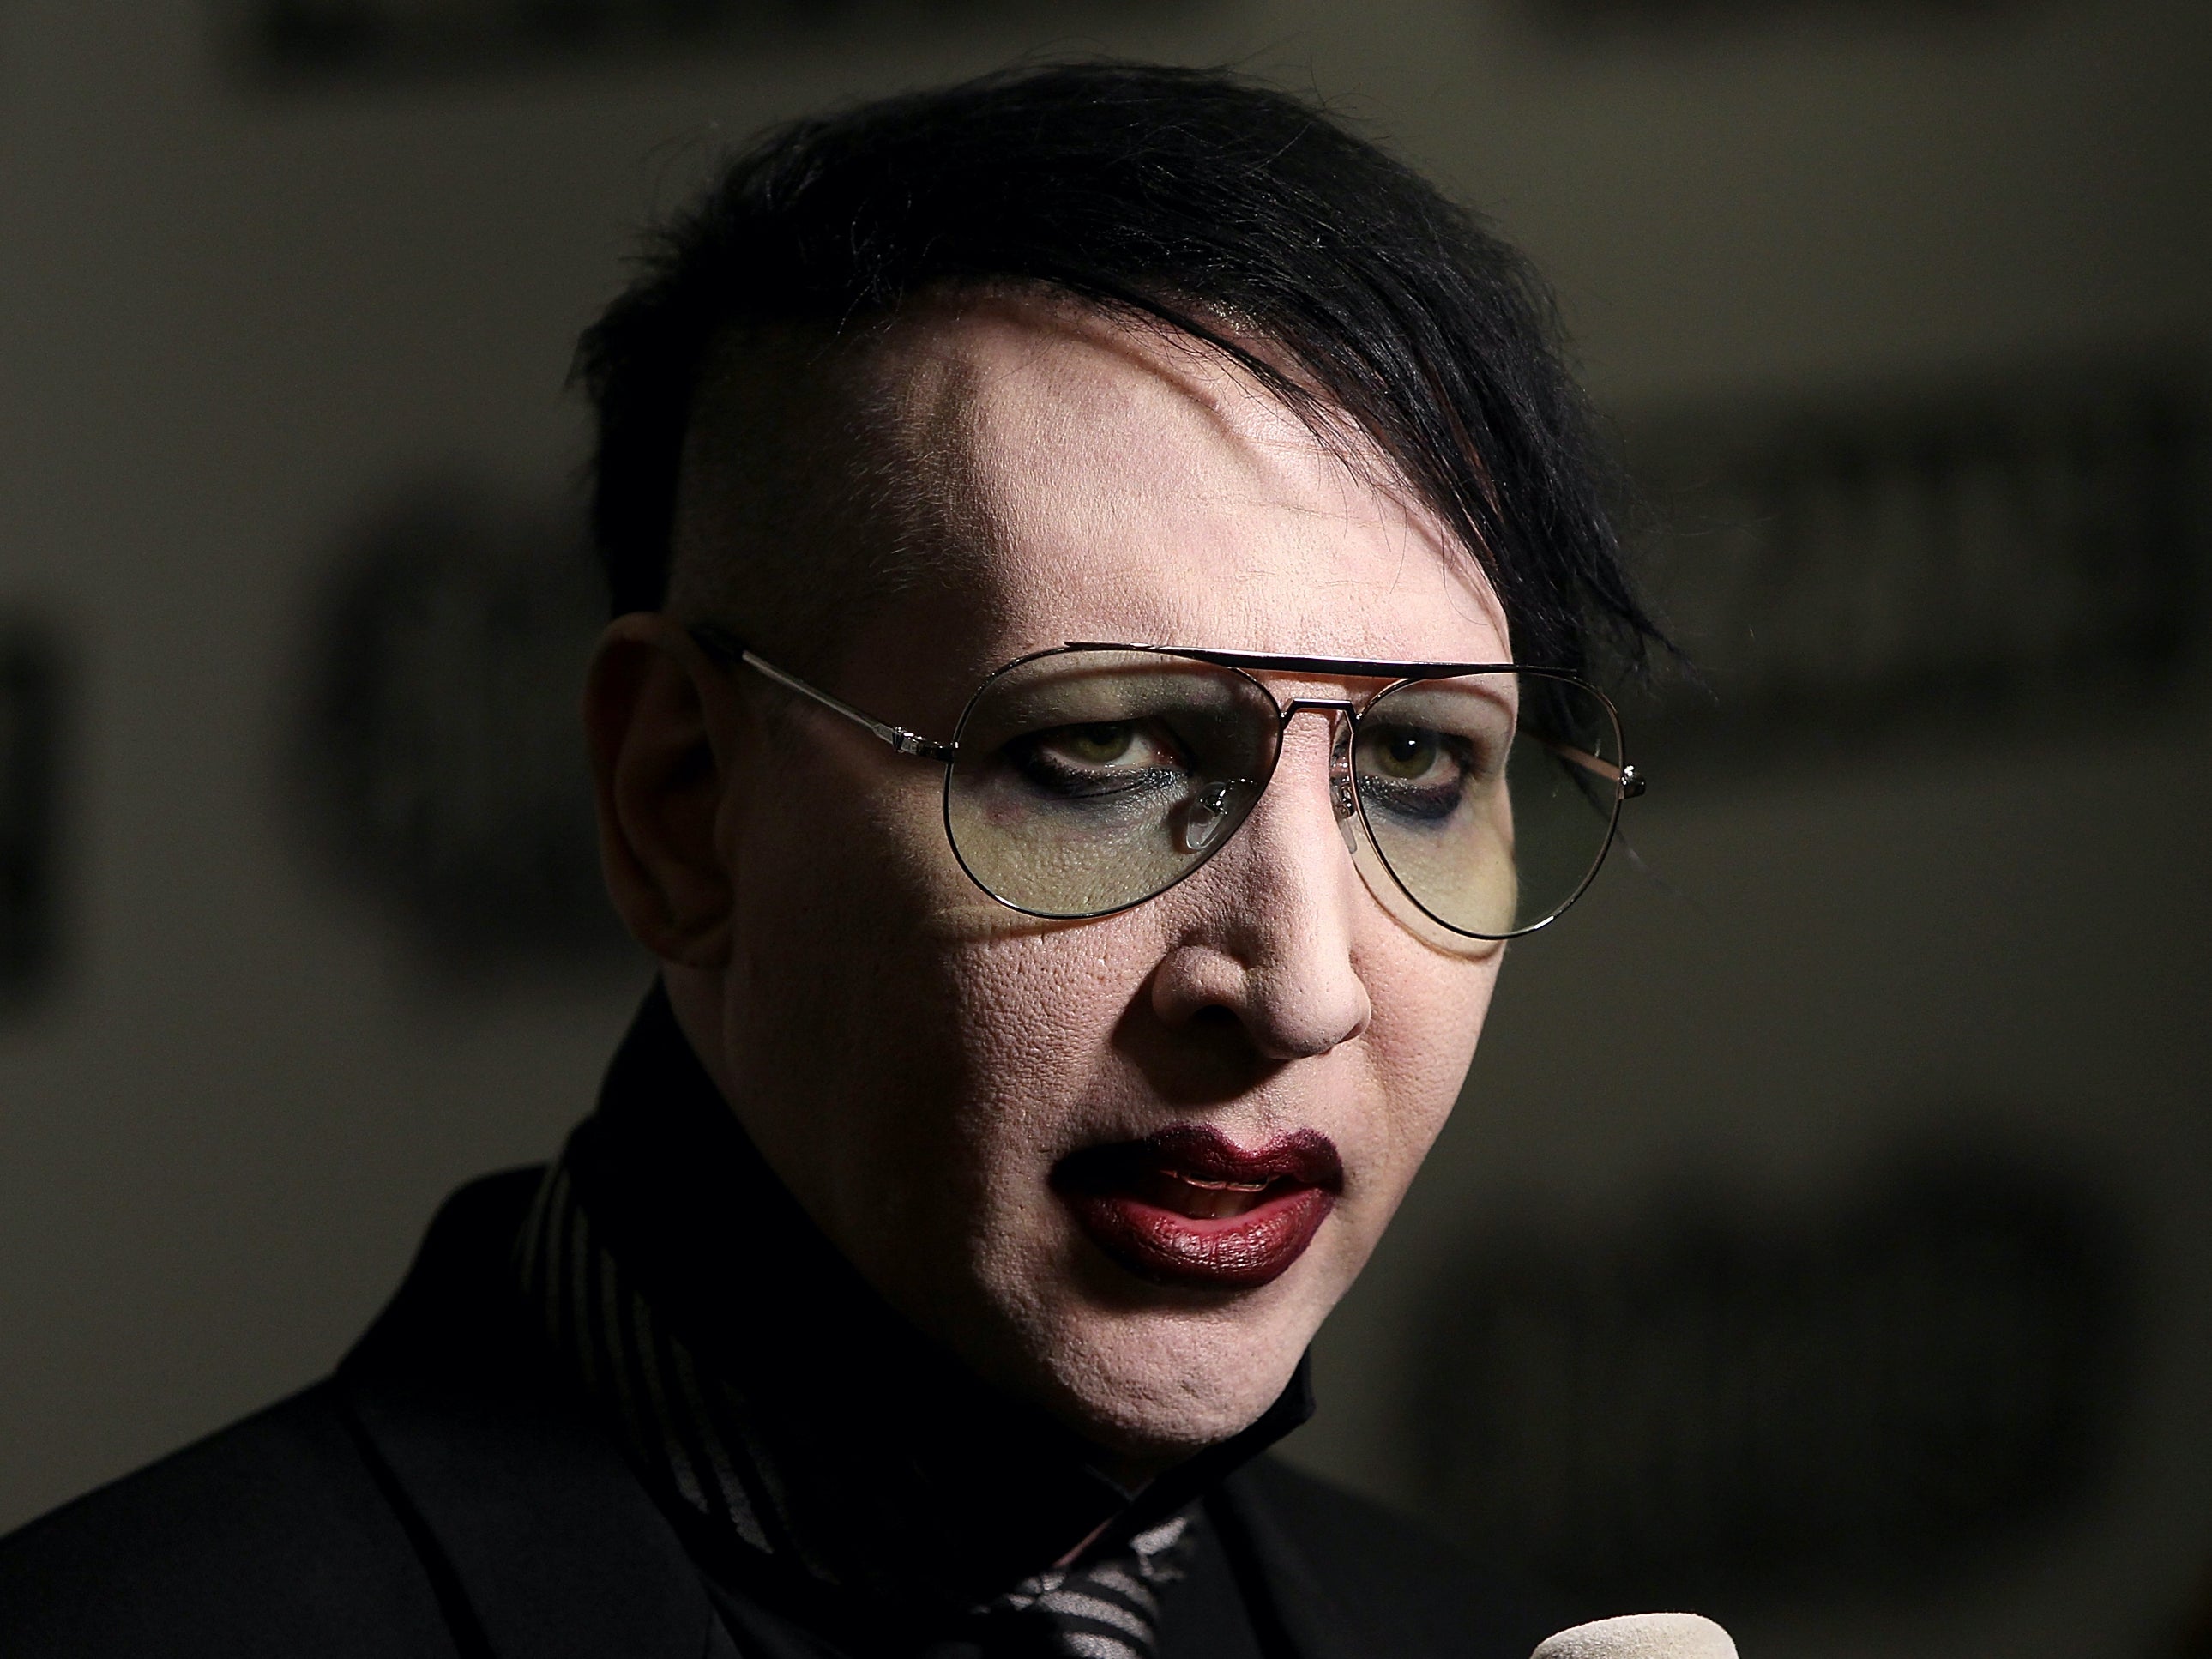 Marilyn Manson denies allegations of abuse made by actor Evan Rachel Wood and other women